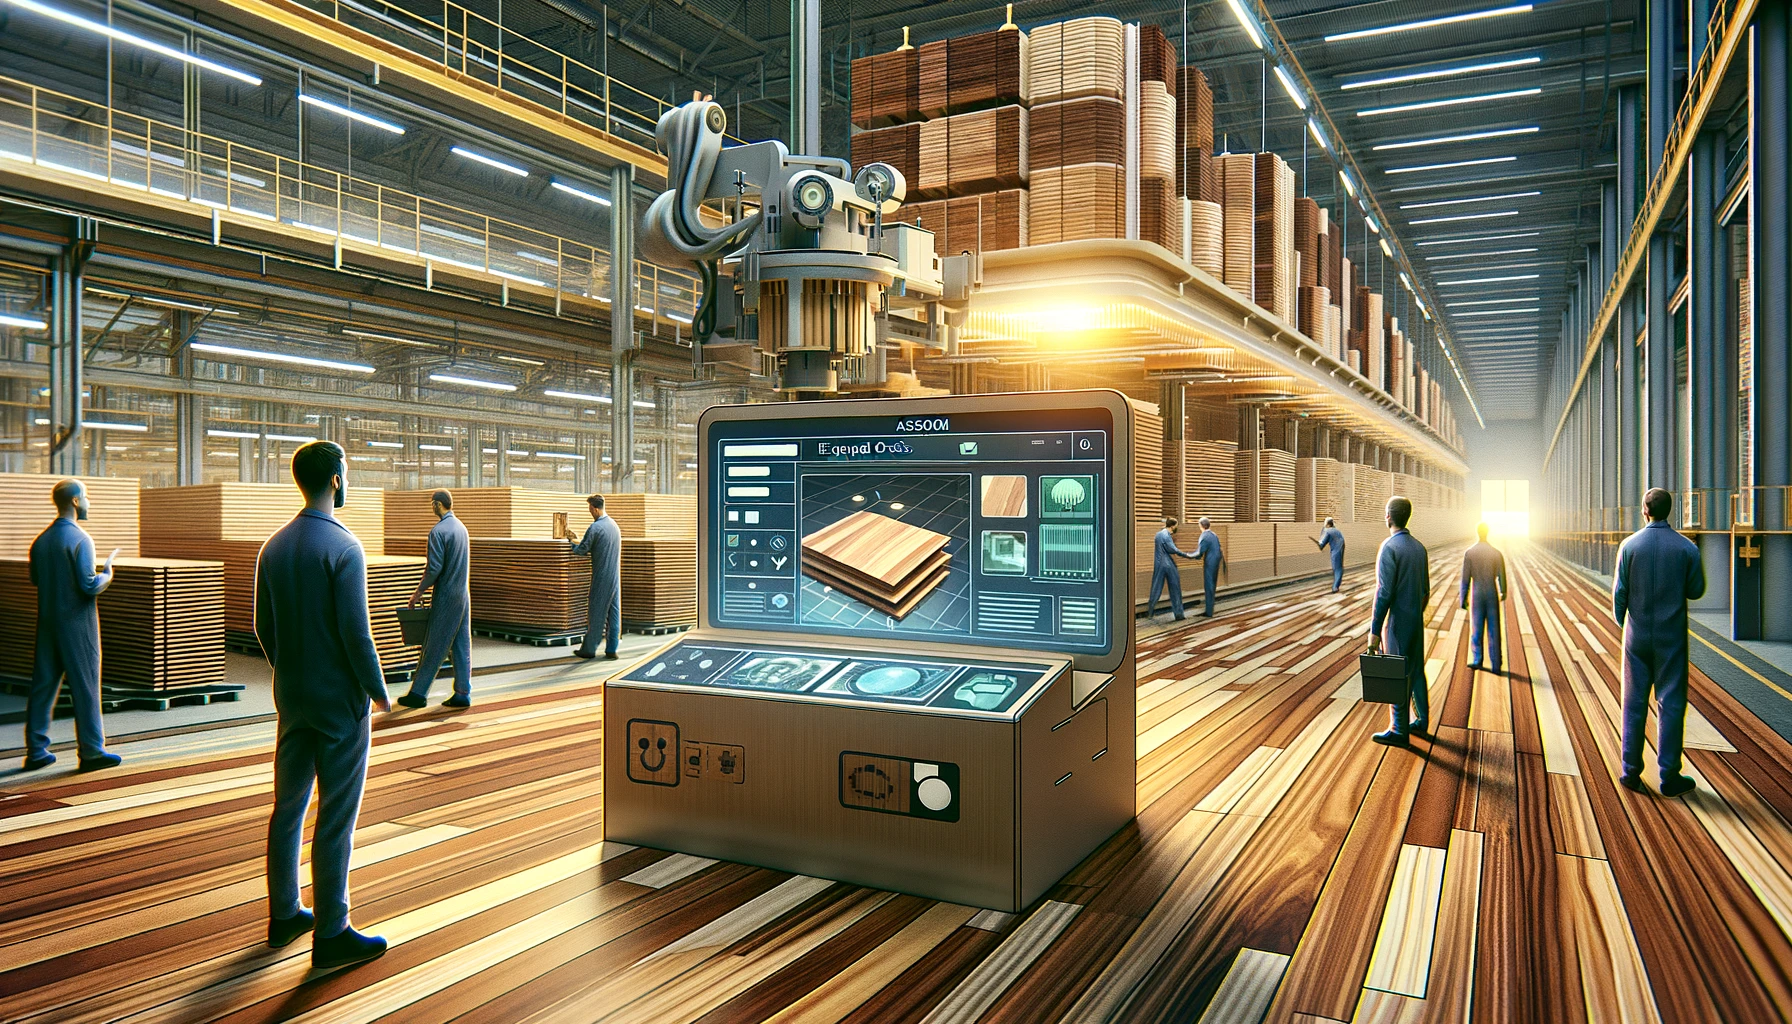 Here's the illustration for the article about the European hardwood flooring manufacturer adopting the EasyODM software. The scene depicts workers on a factory floor, interacting with a sophisticated AI system, enhancing the precision and efficiency of parquet checks. The digital painting showcases a balanced blend of warm and cool colors, emphasizing the high-tech environment and the detailed interaction between the workers and the technology.